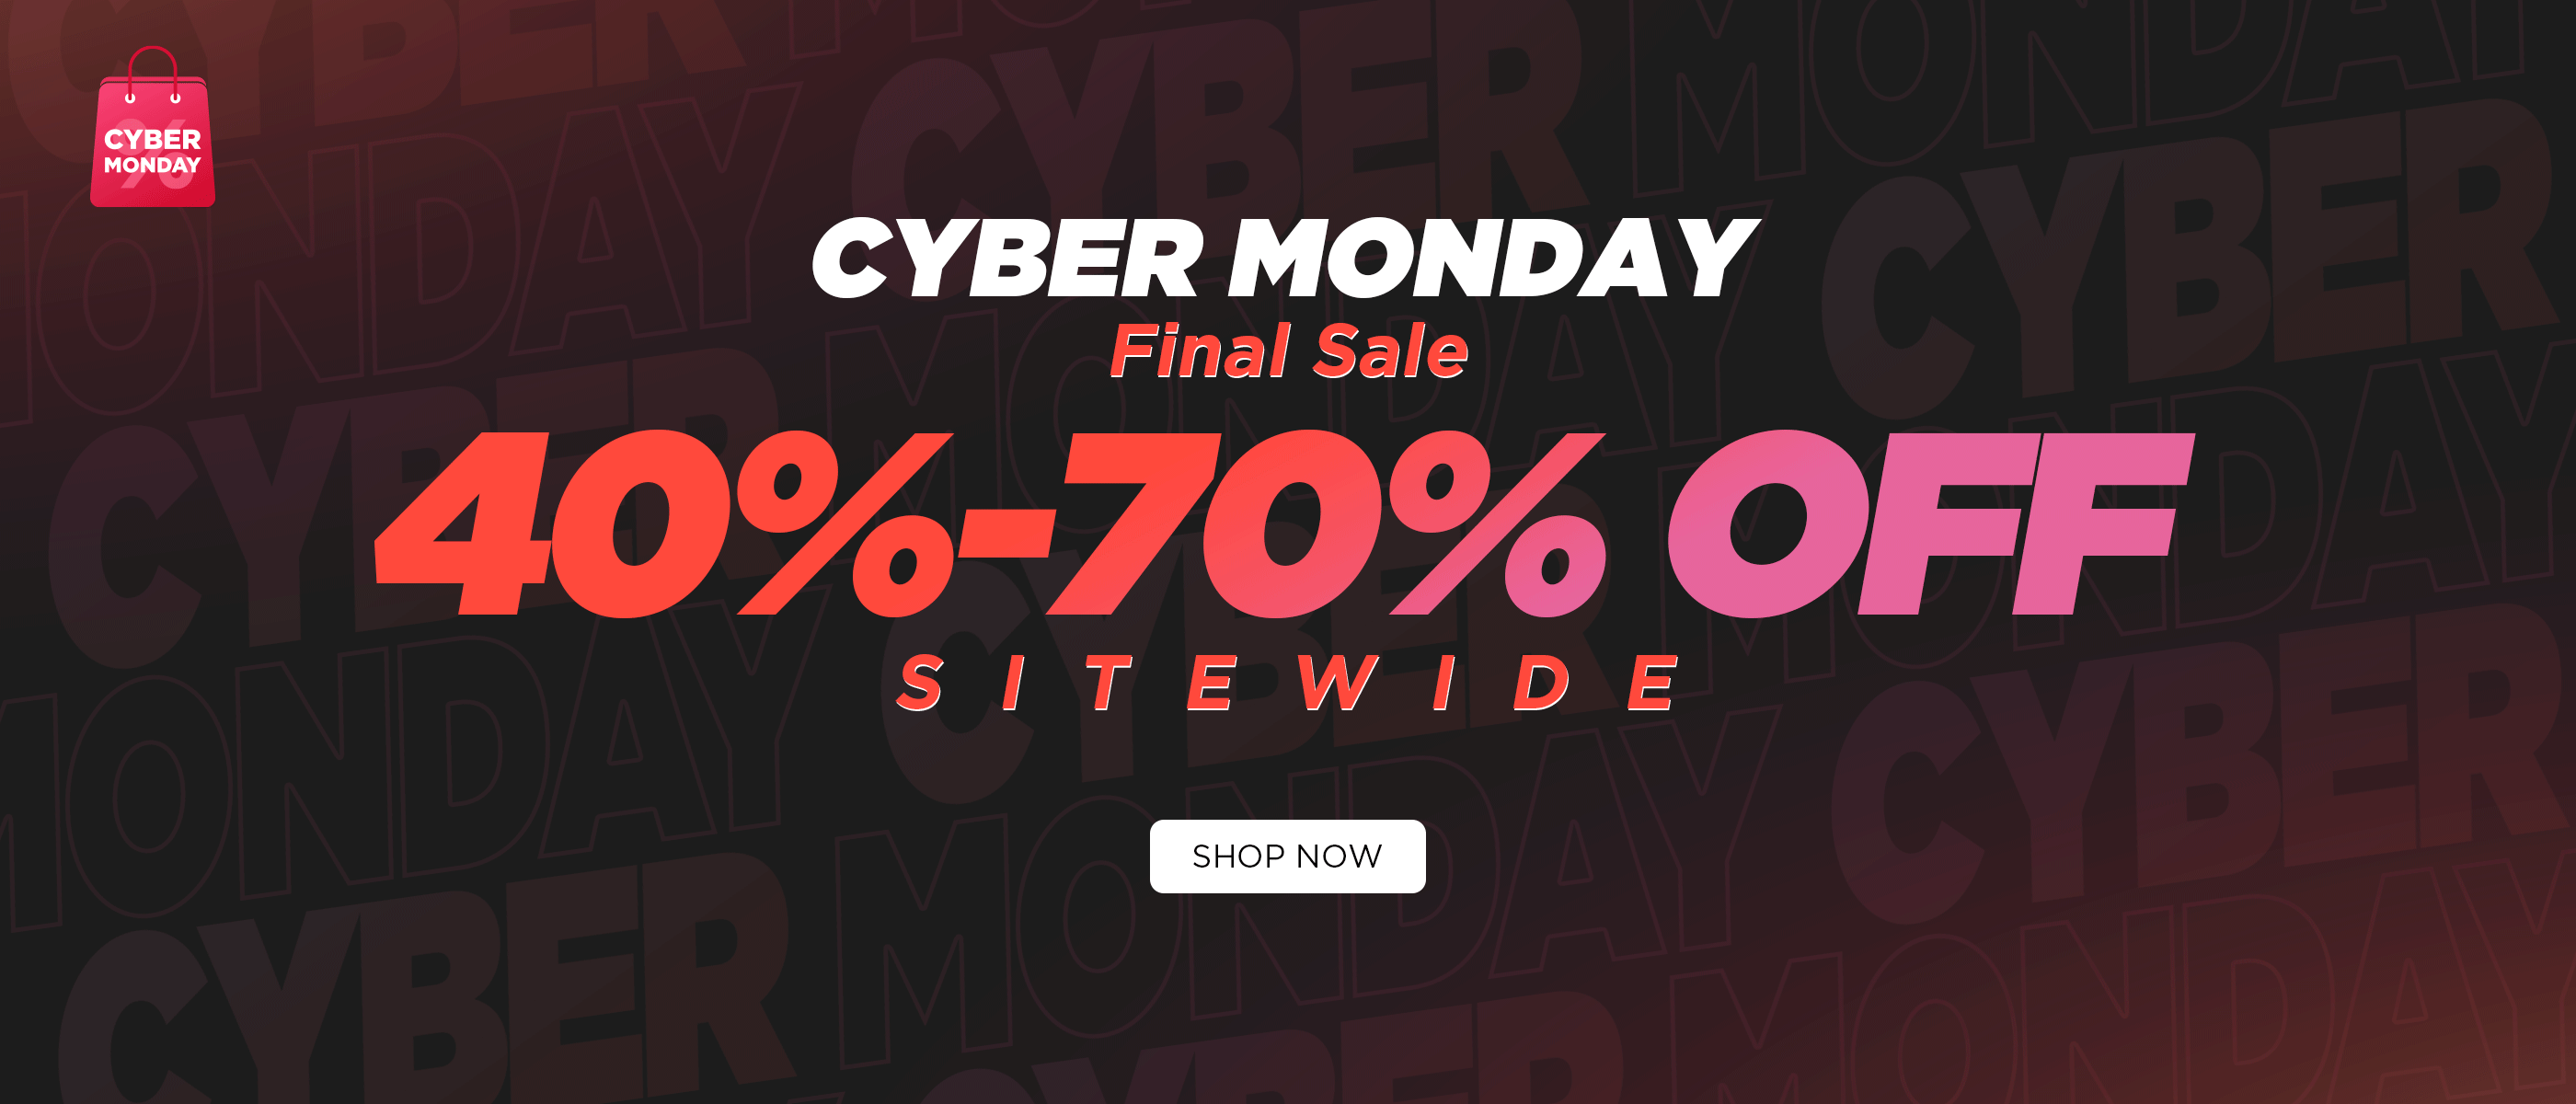 Cyber Monday Final Sale 40%-70% OFF SITEWIDE